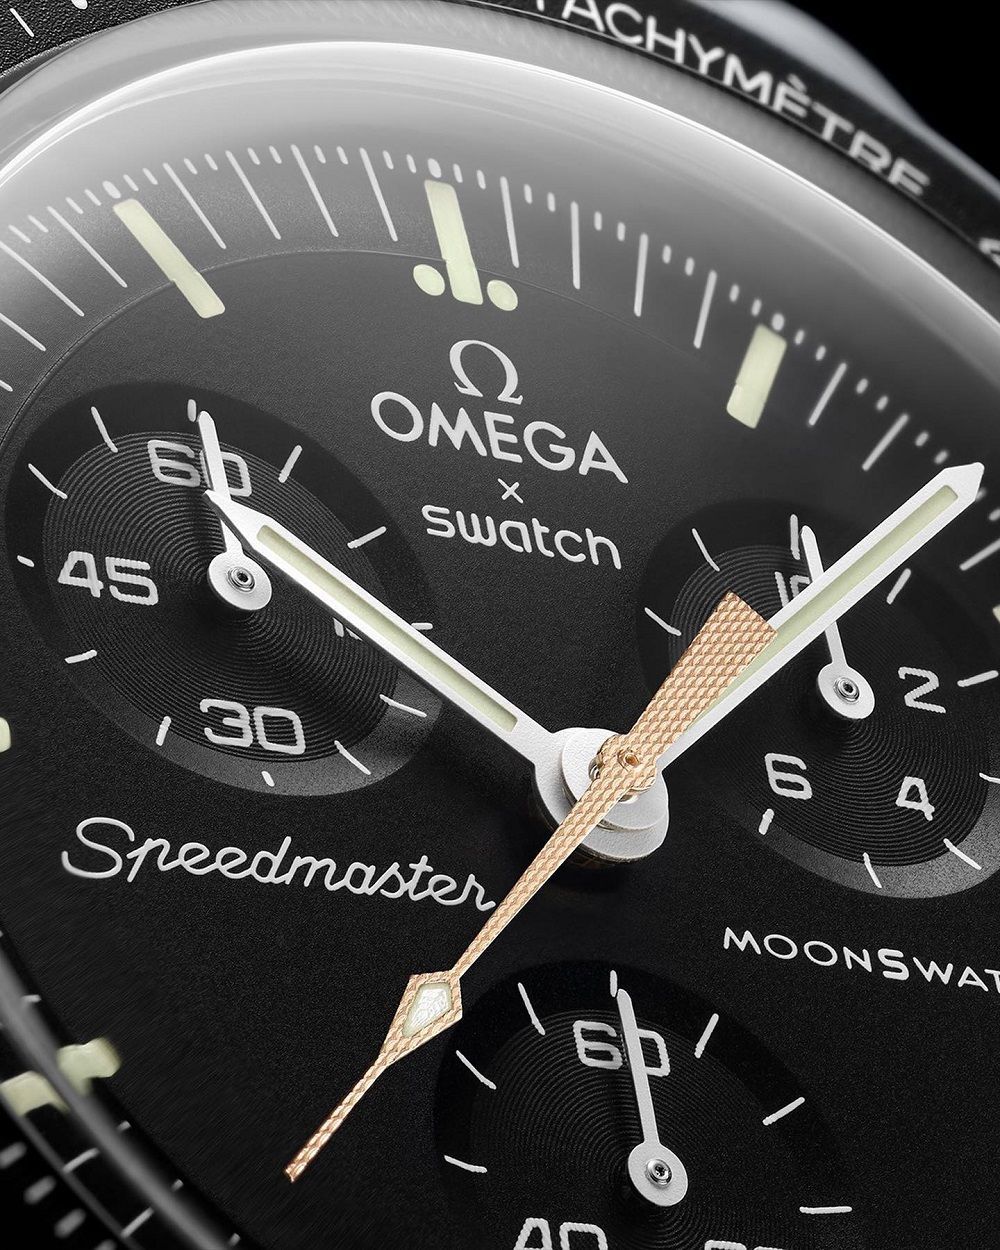 Omega X Swatch reveal Mission to Moonshine Gold Harvest moon watch